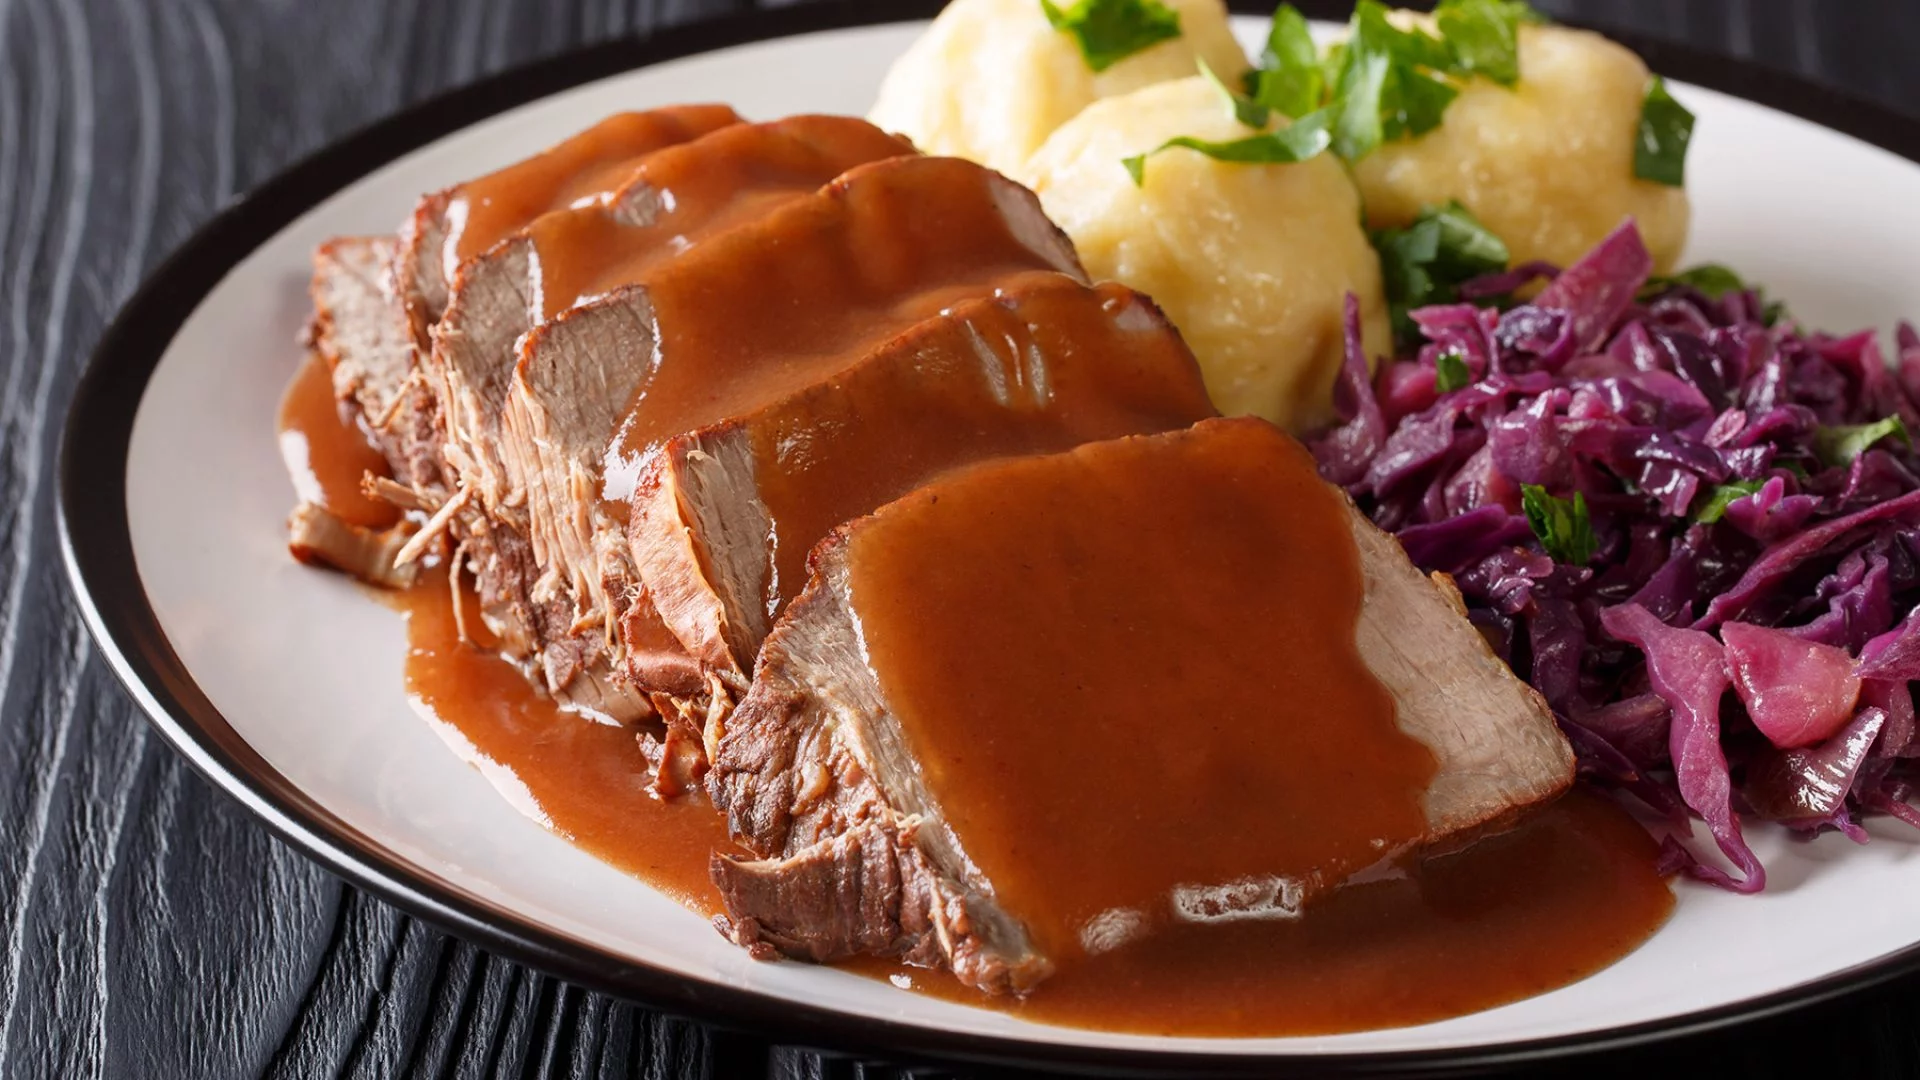 Discovering Germany Through Its Traditional Foods